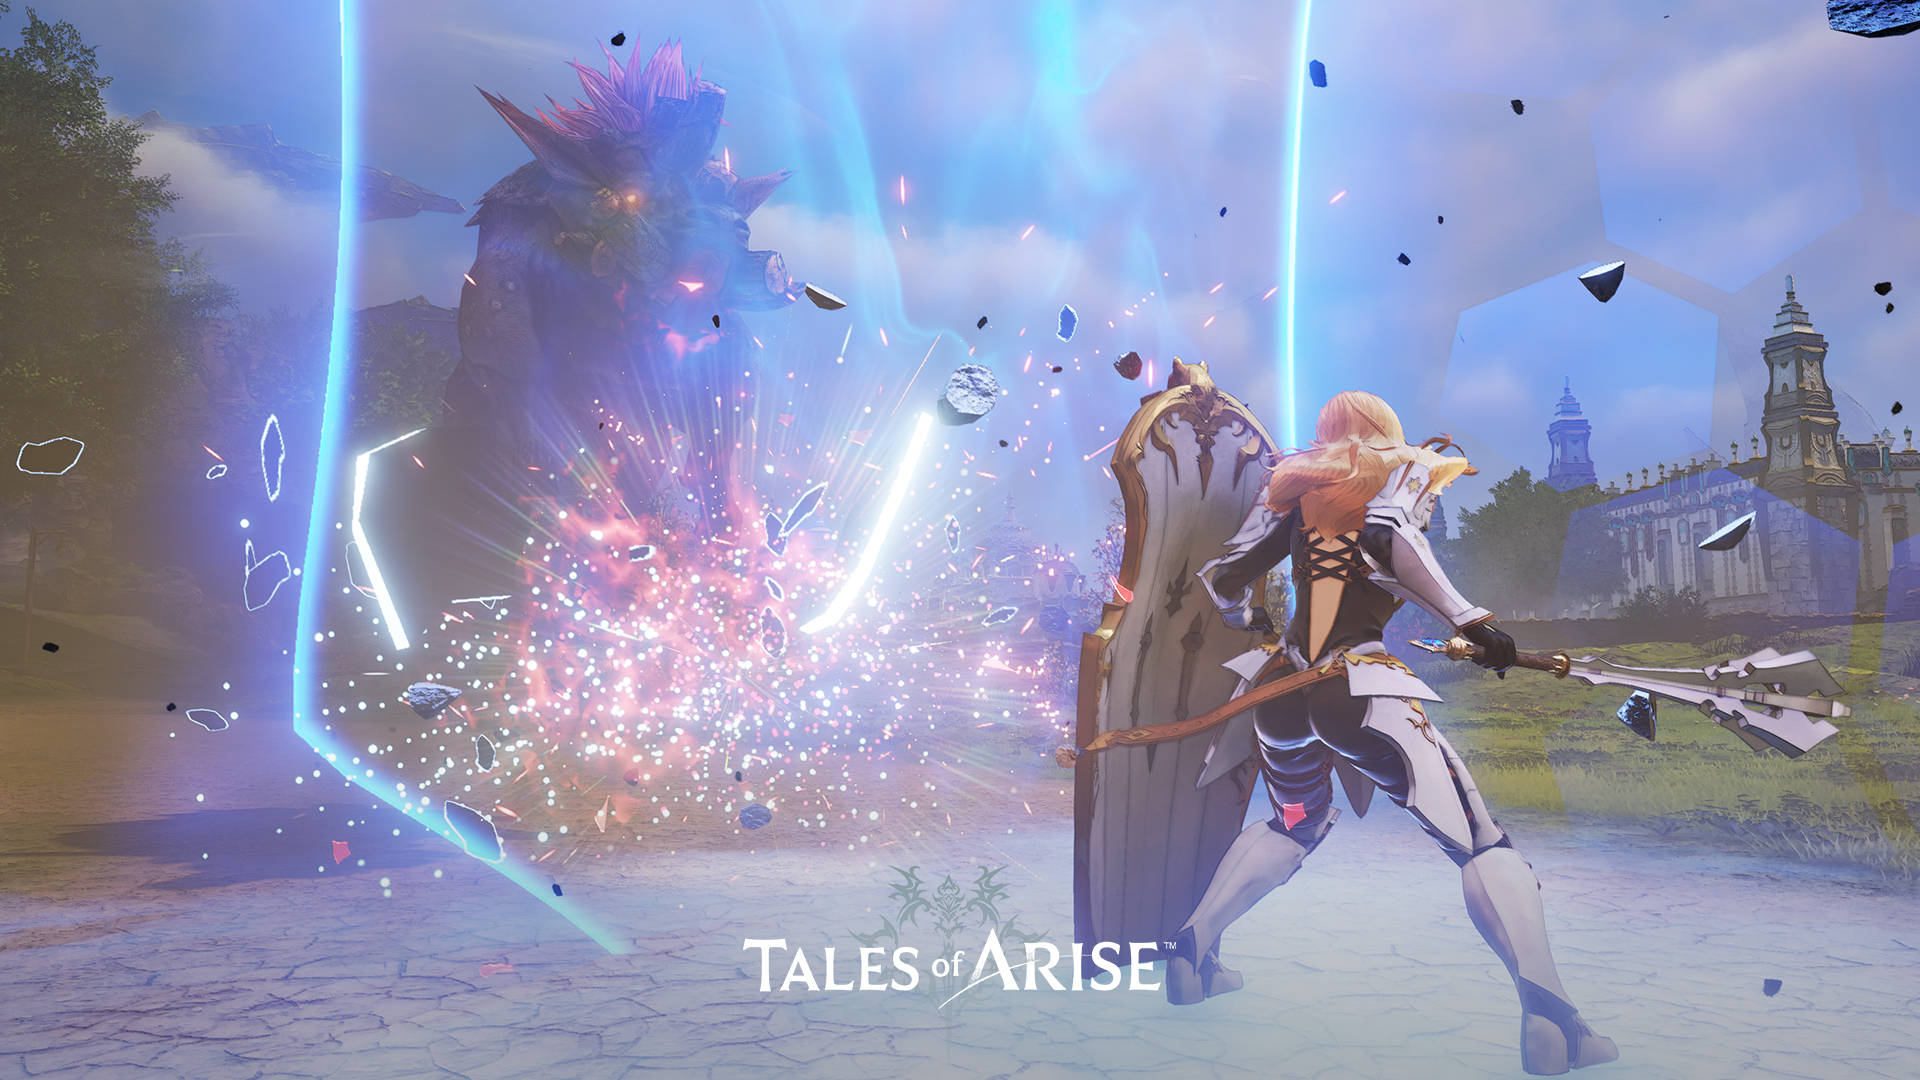 Tales of Arise Gets Gorgeous New Screenshots, Art, & Videos Showing New